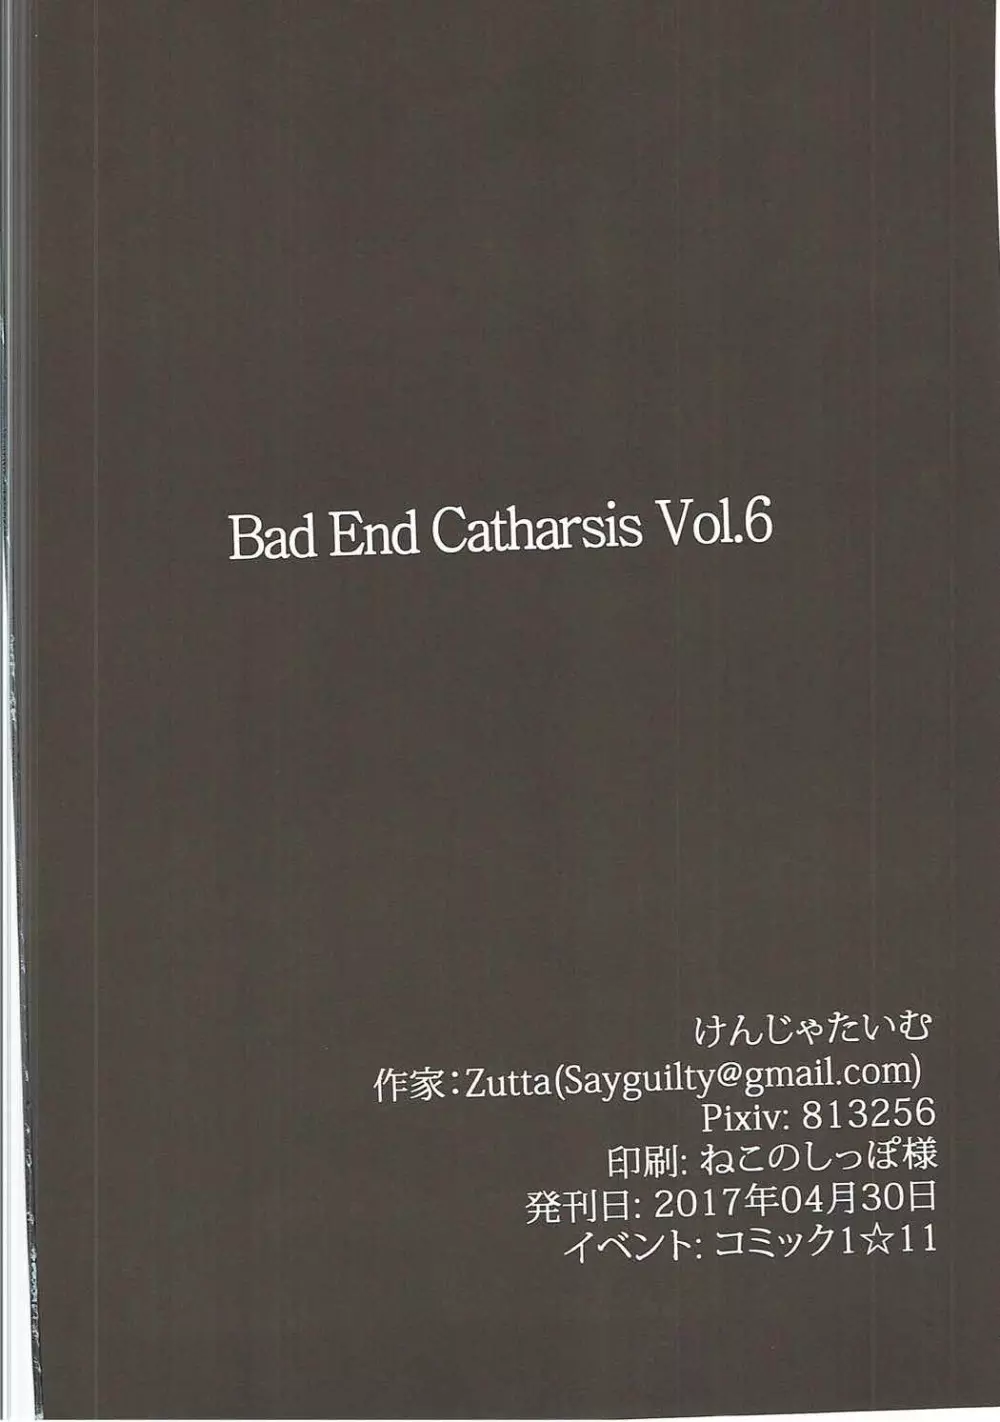 Bad End Catharsis Vol.6 Page.21